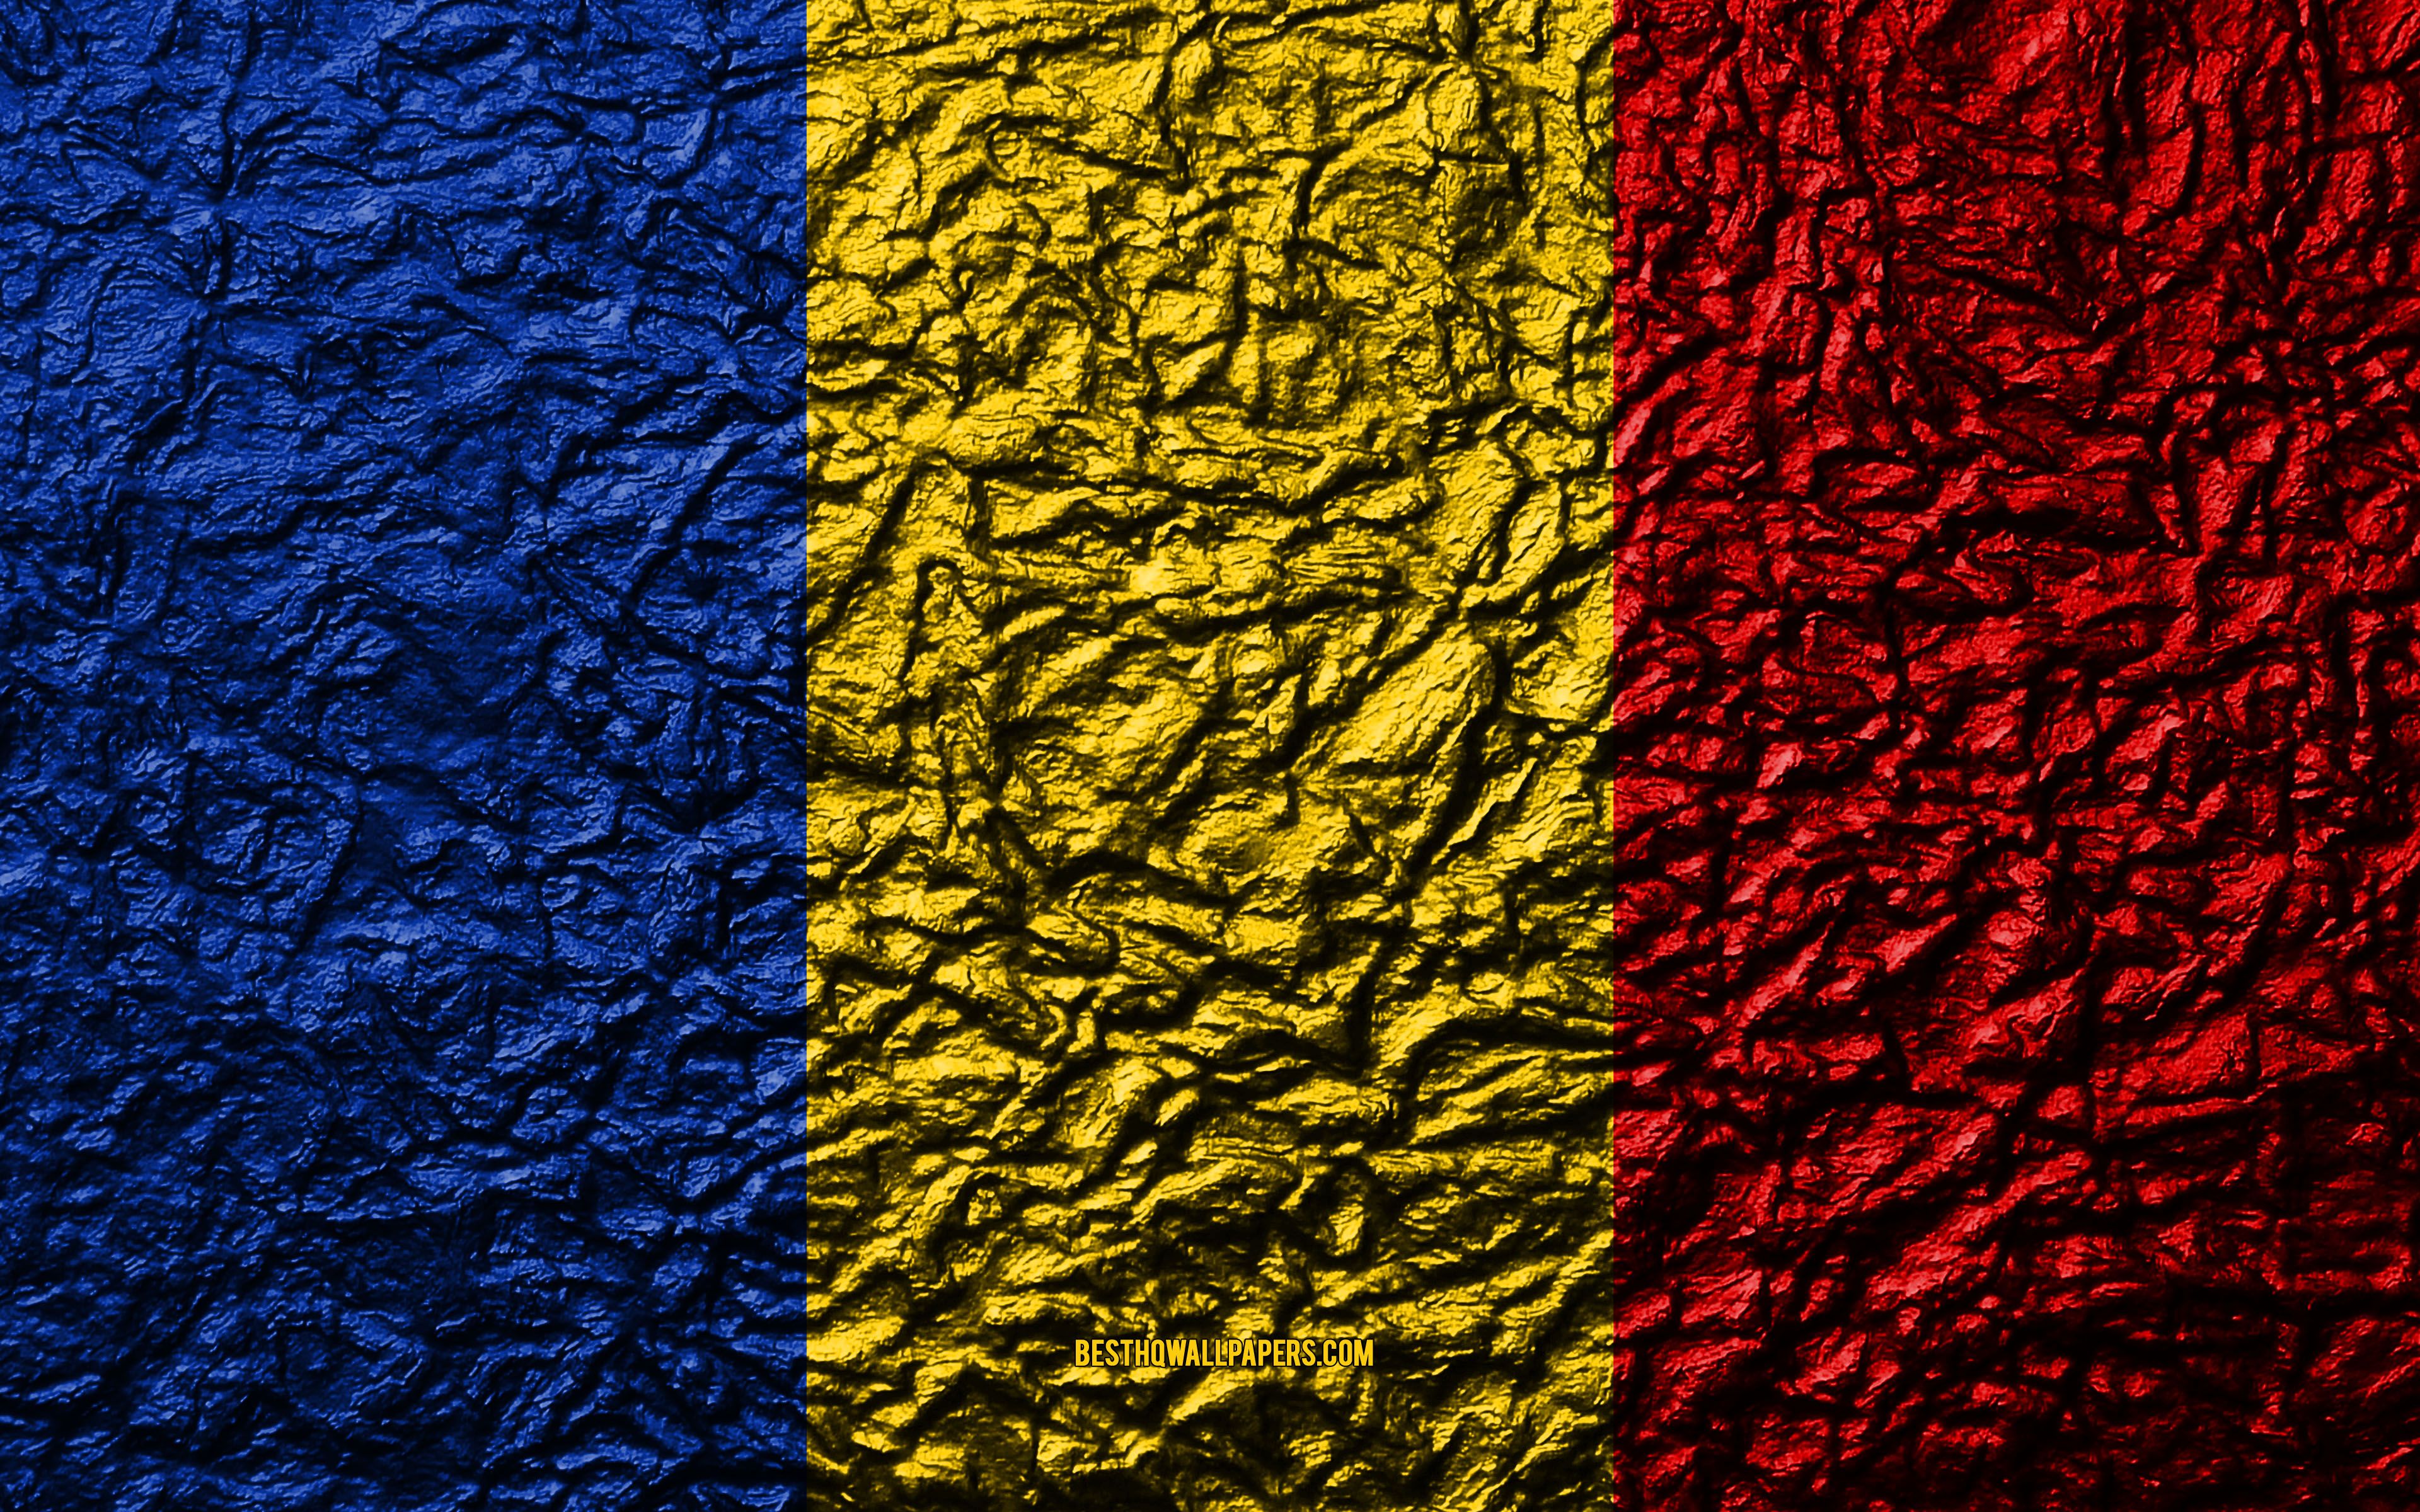 Download wallpaper Flag of Romania, 4k, stone texture, waves texture, Romanian flag, national symbol, Romania, Europe, stone background for desktop with resolution 3840x2400. High Quality HD picture wallpaper